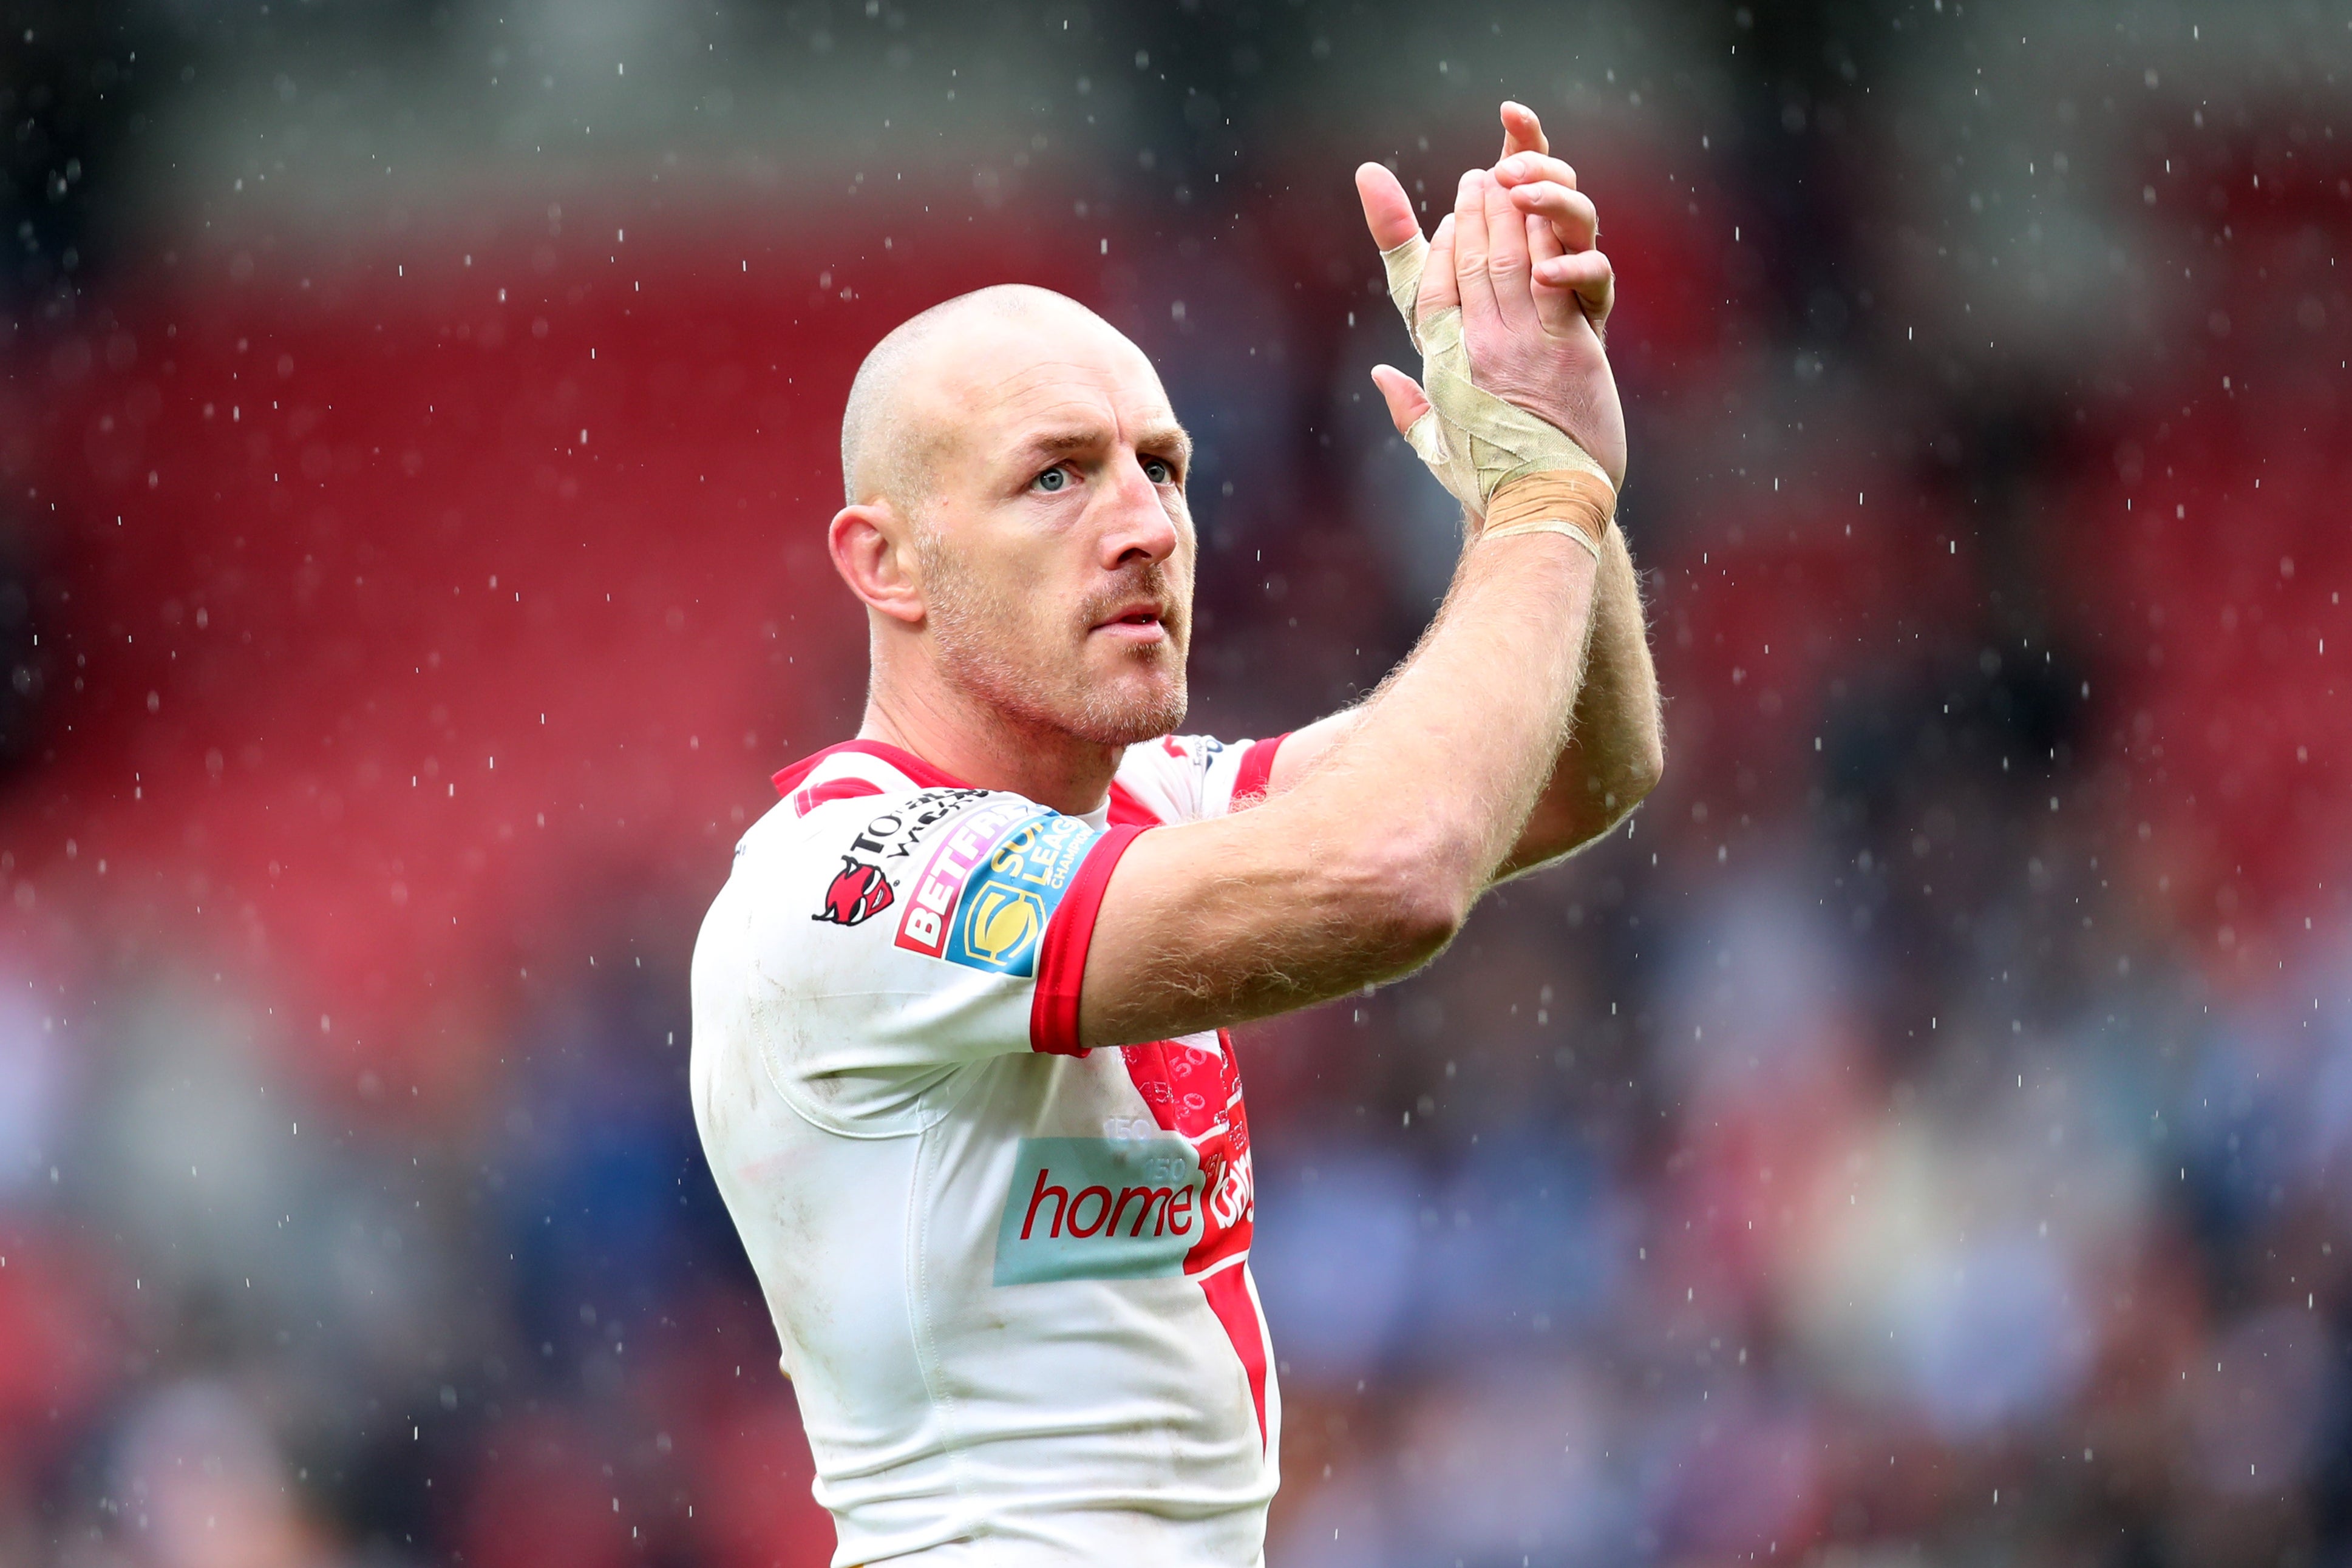 St Helens start life after James Roby, who has retired